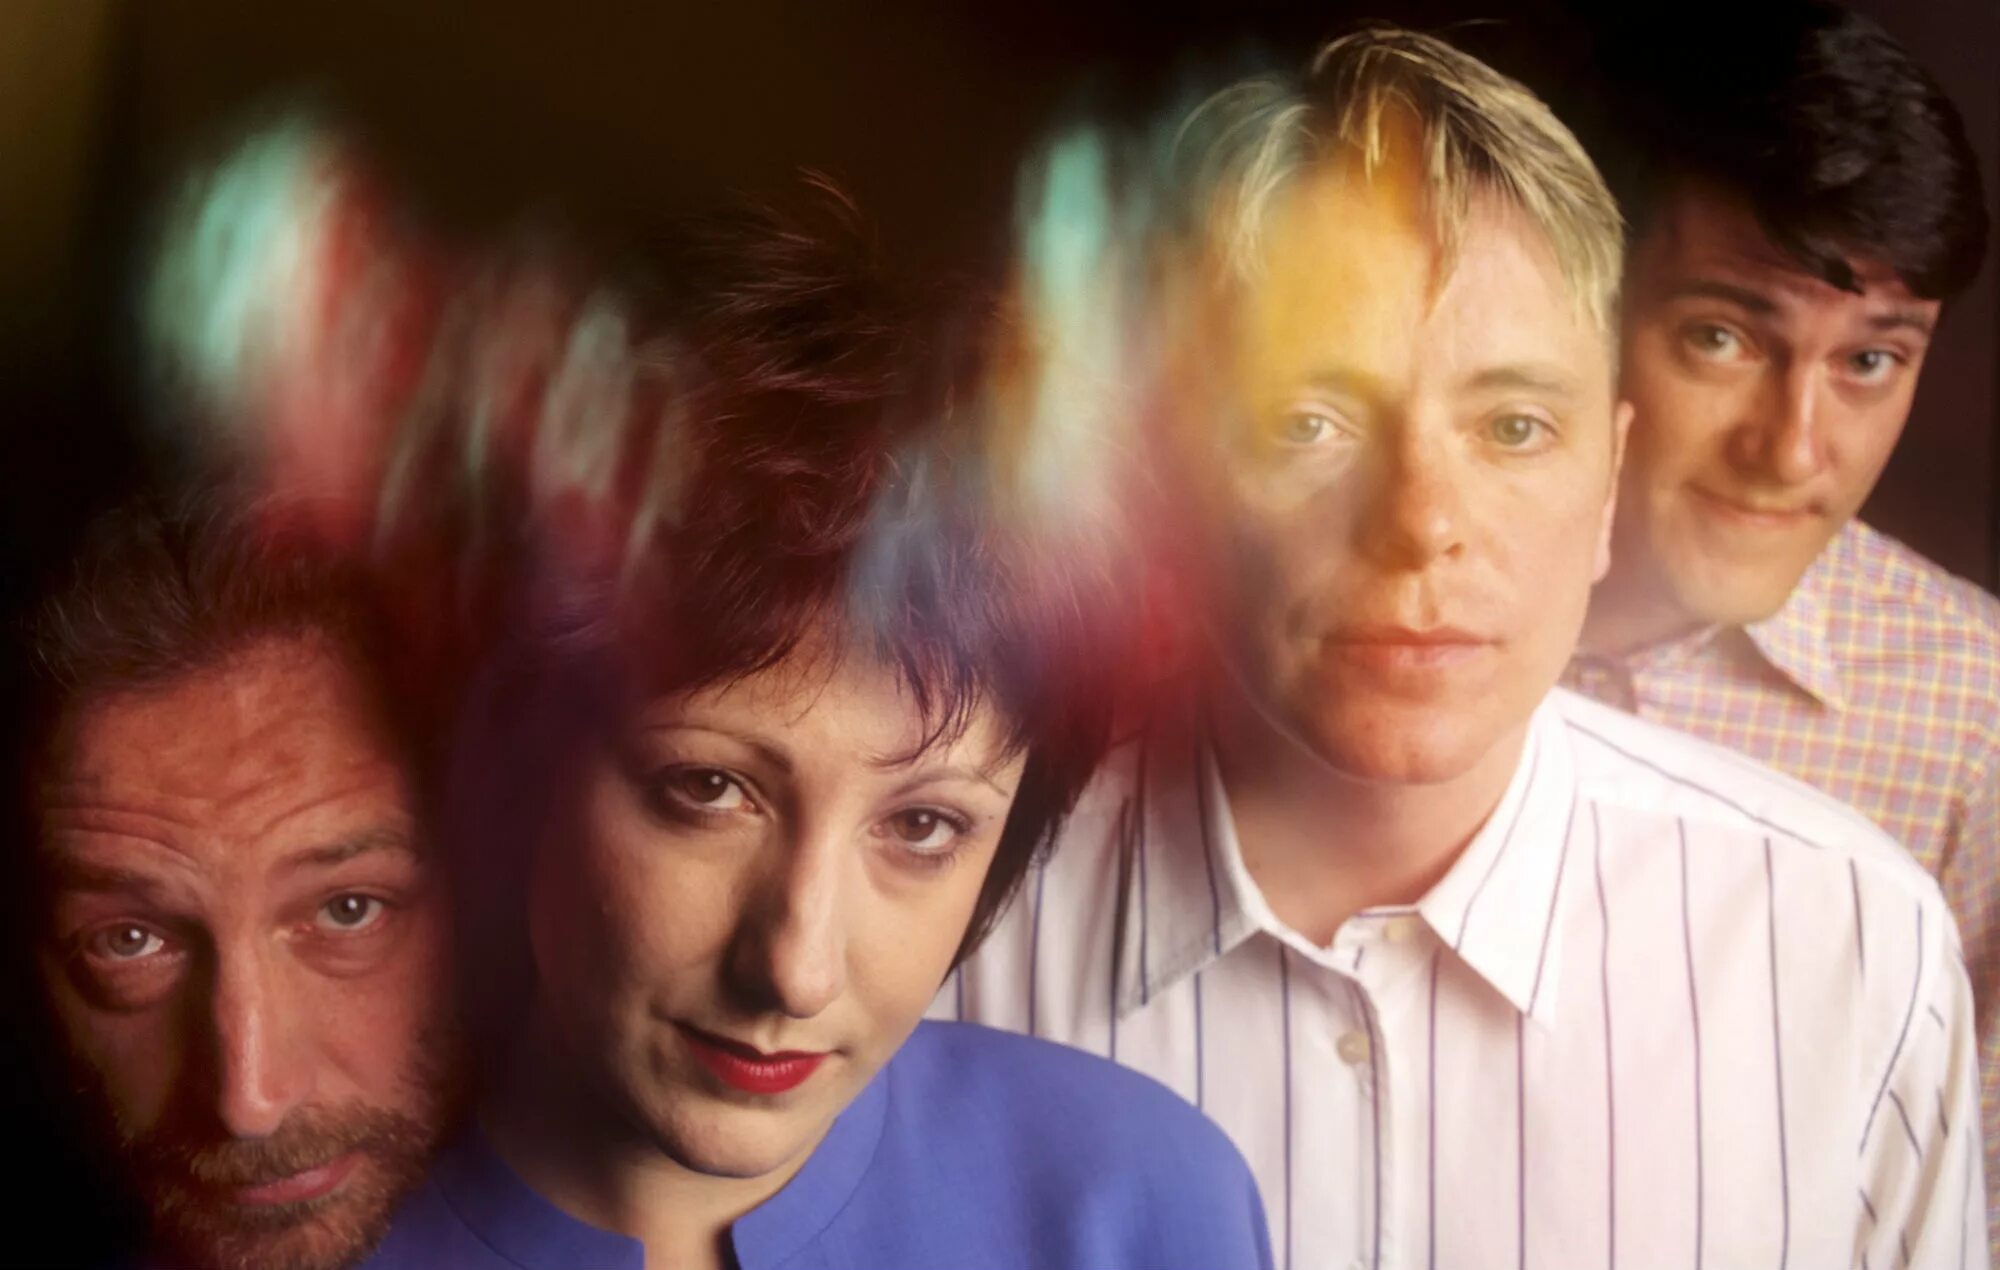 We have new order. Группа New order 1980s. New order вокалист. New order 2007. Солист Нью ордер.